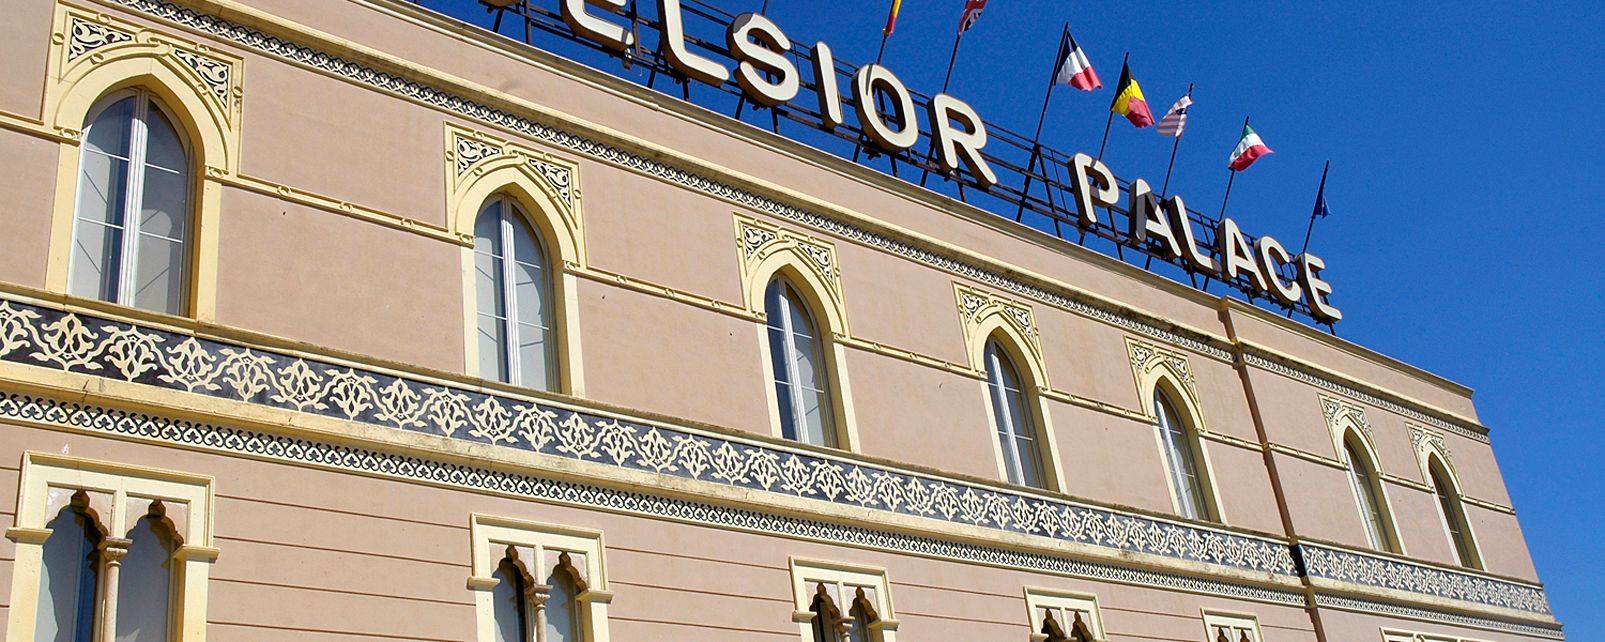 Hotel Excelsior Palace